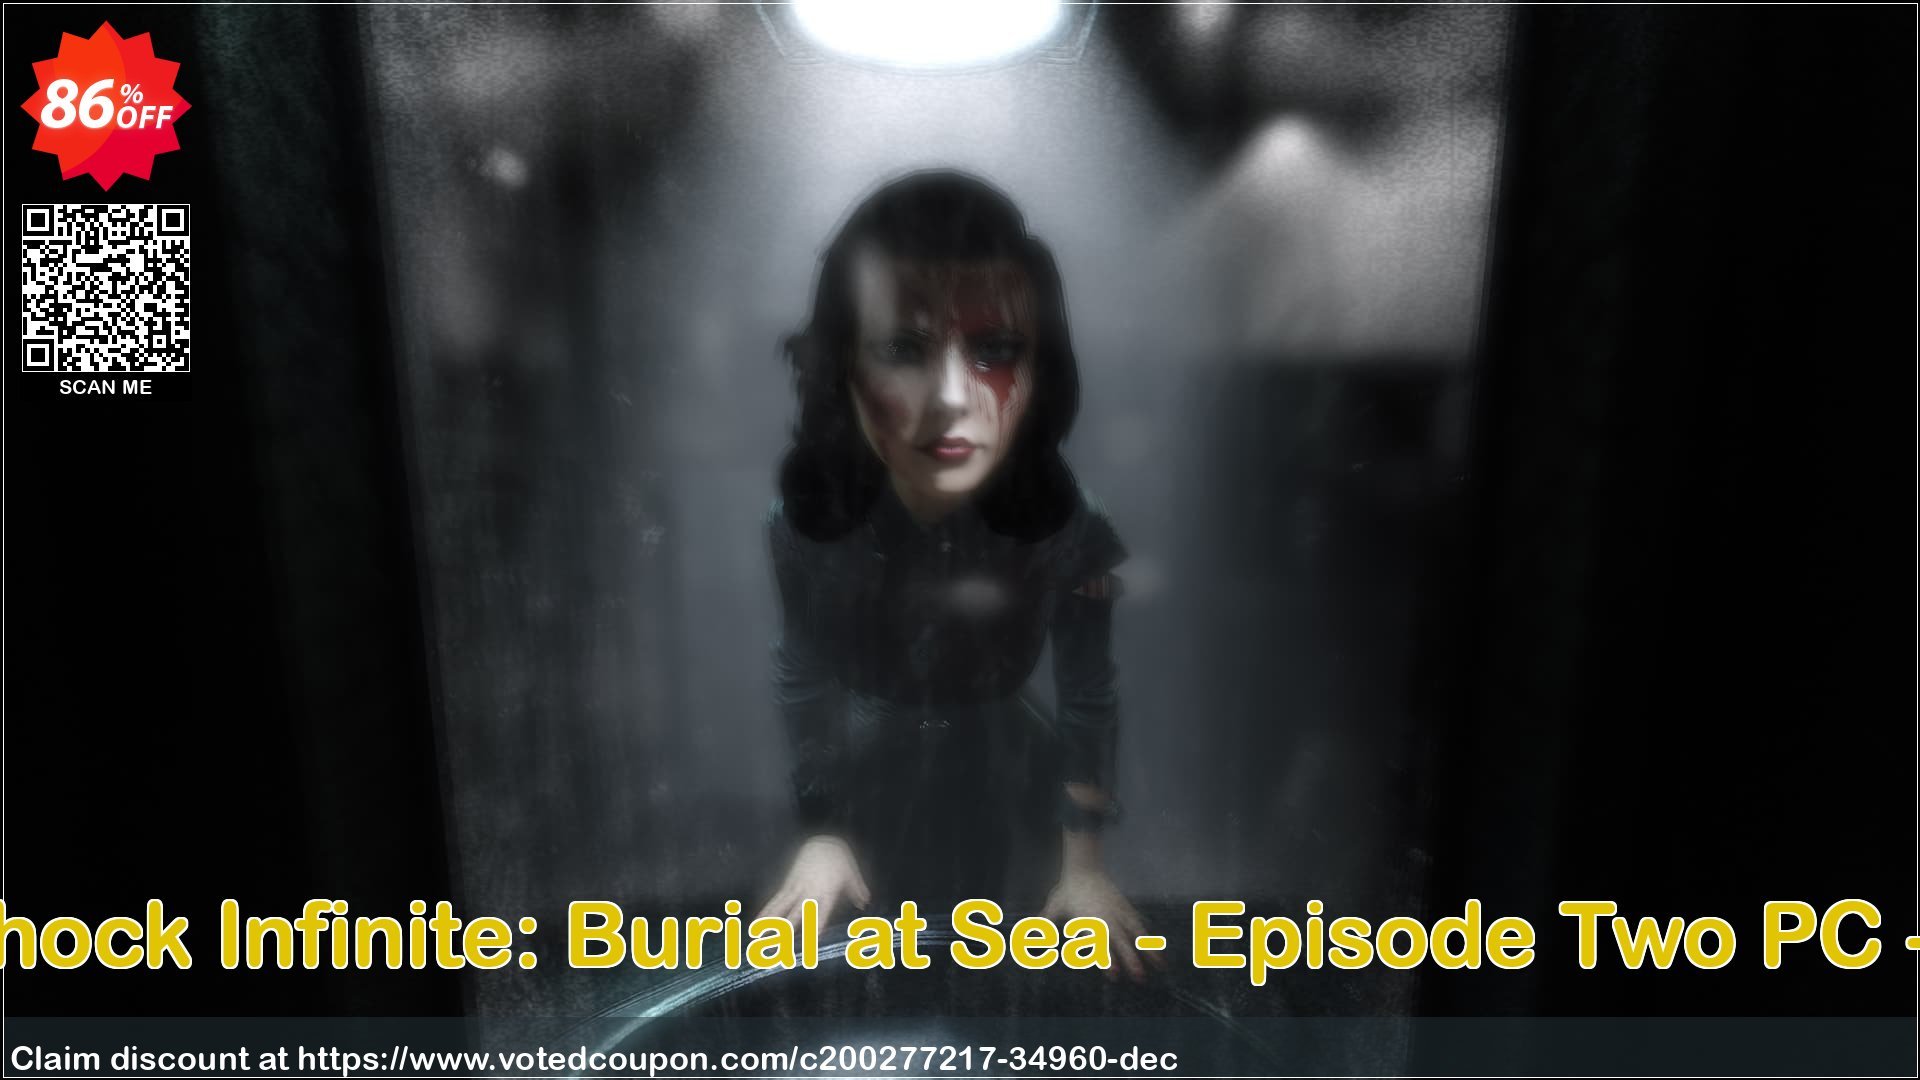 BioShock Infinite: Burial at Sea - Episode Two PC - DLC Coupon Code Apr 2024, 86% OFF - VotedCoupon